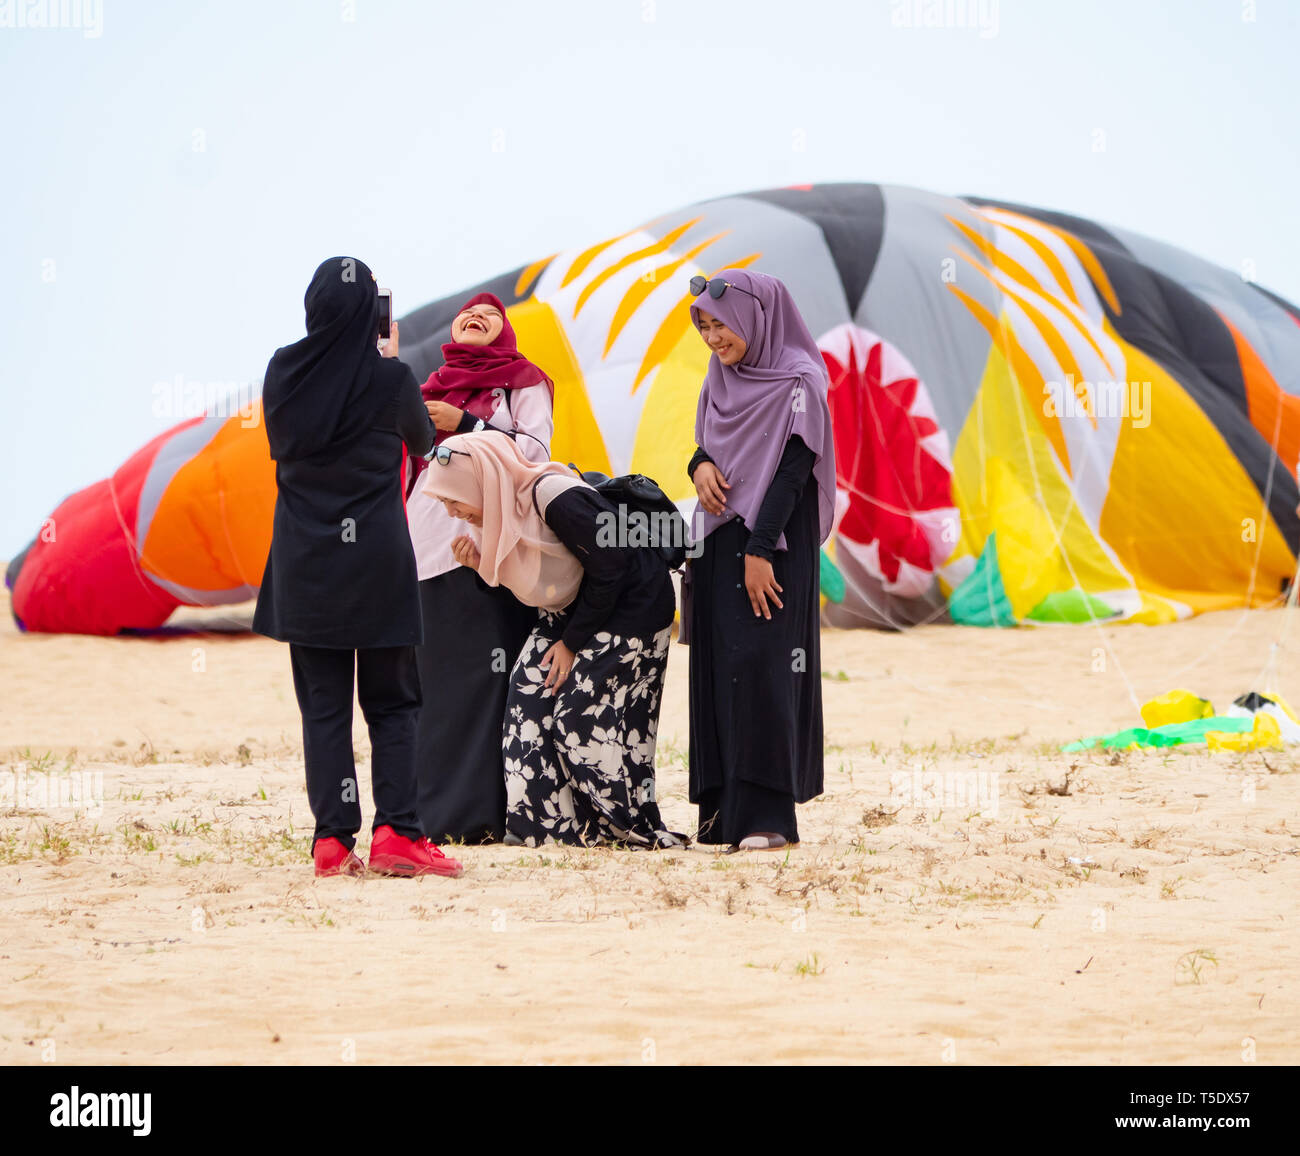 Four Muslim women wearing hijab taking photos on the beach in the conservative Kelantan State of Malaysia. In the background is a large deflated kite. Stock Photo